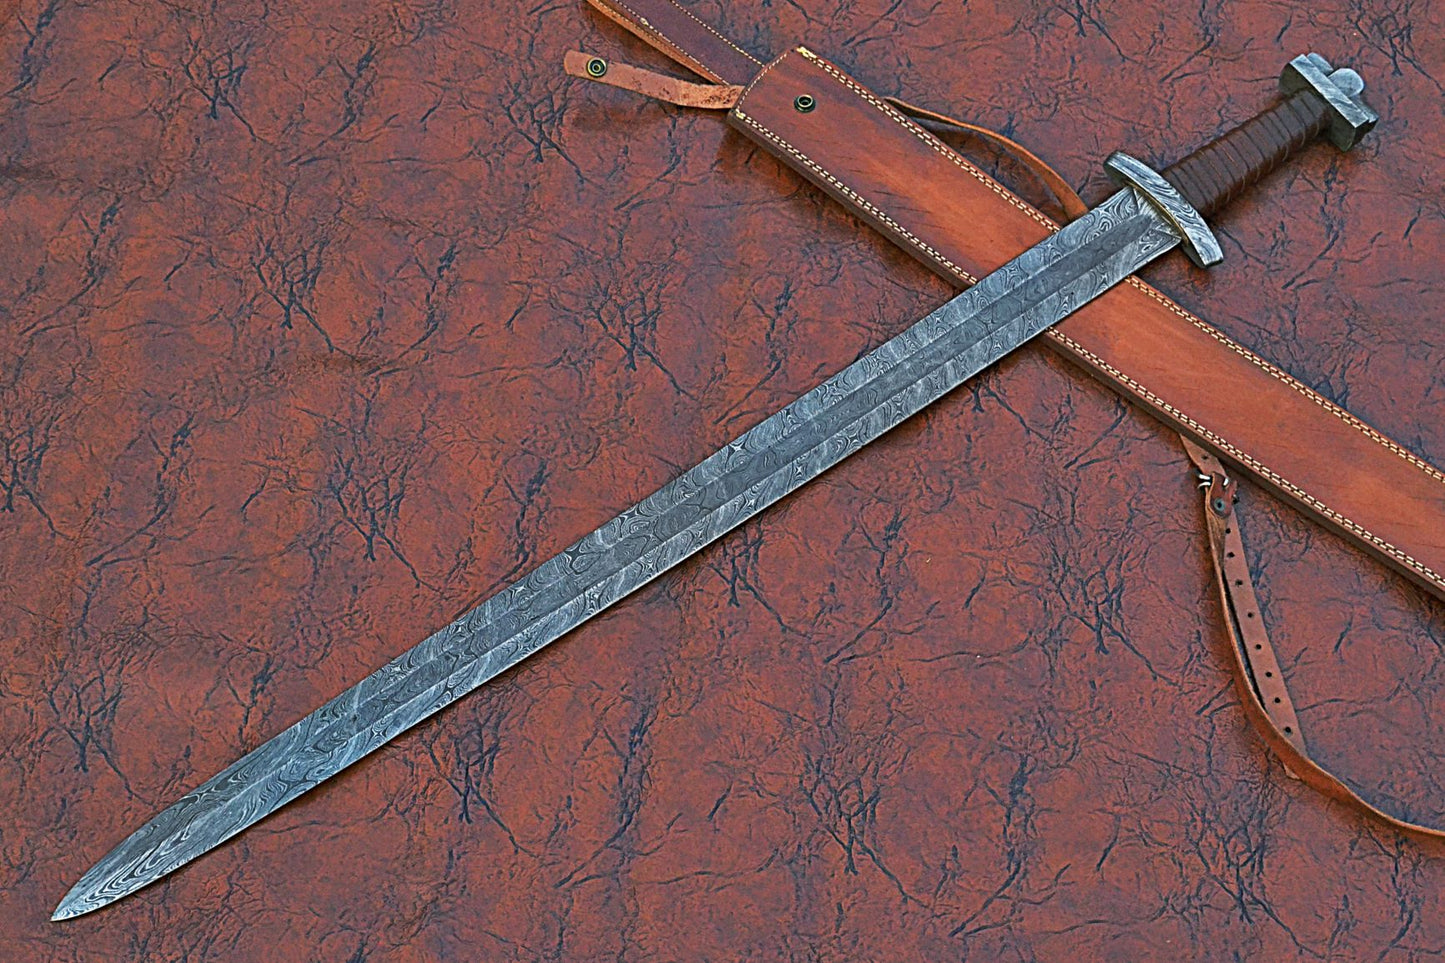 39 inches Long Green Destiny Sword, 31" Long Hand Forged Damascus Steel Double Edge Blade, Solid Damascus Steel Cross hilt Forward and Pommel, Leather Scabbard with Shoulder Stripe